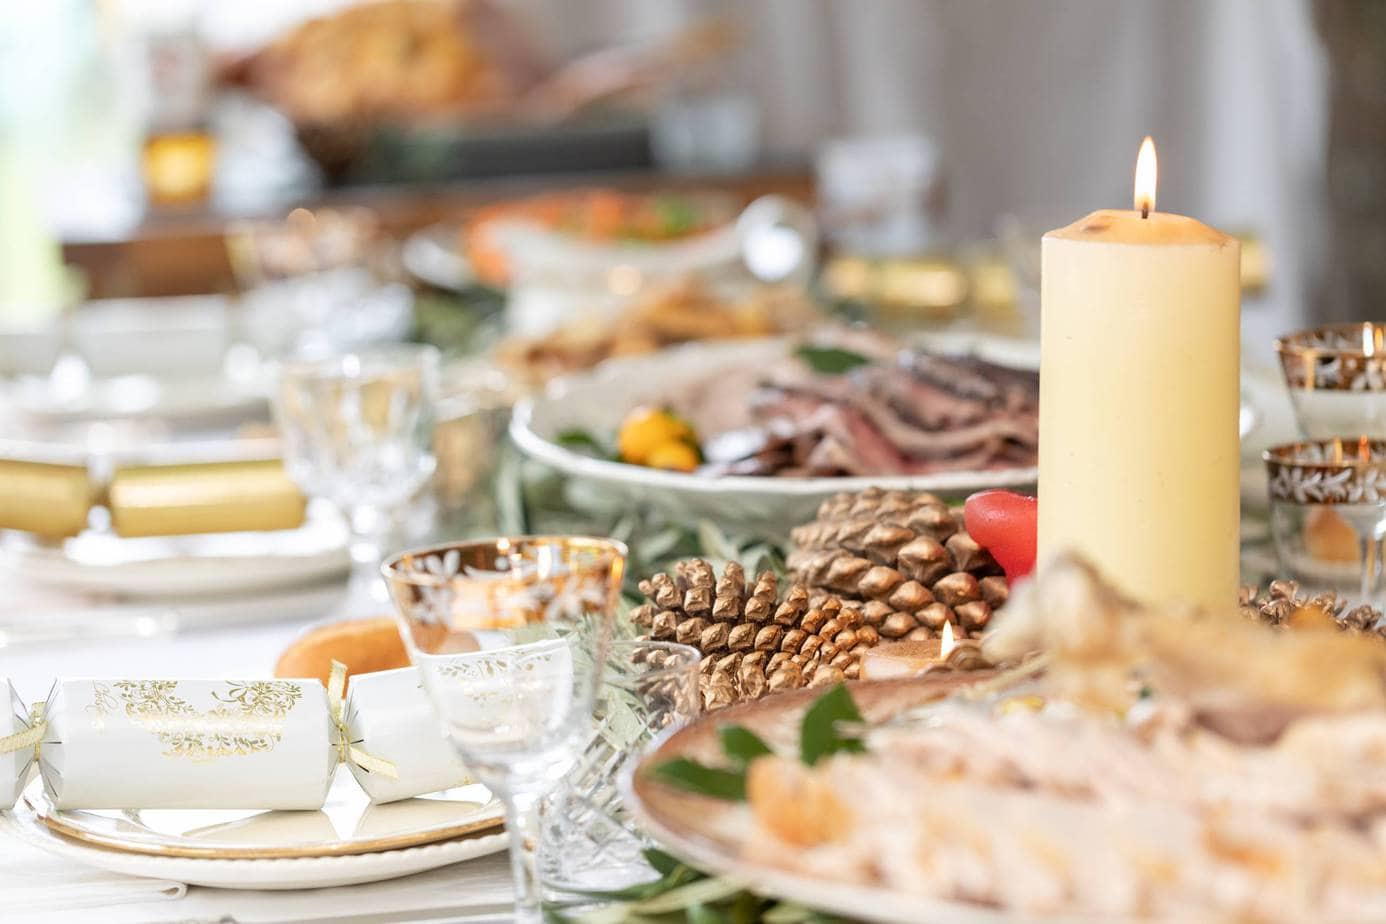 Budget-friendly Christmas catering options